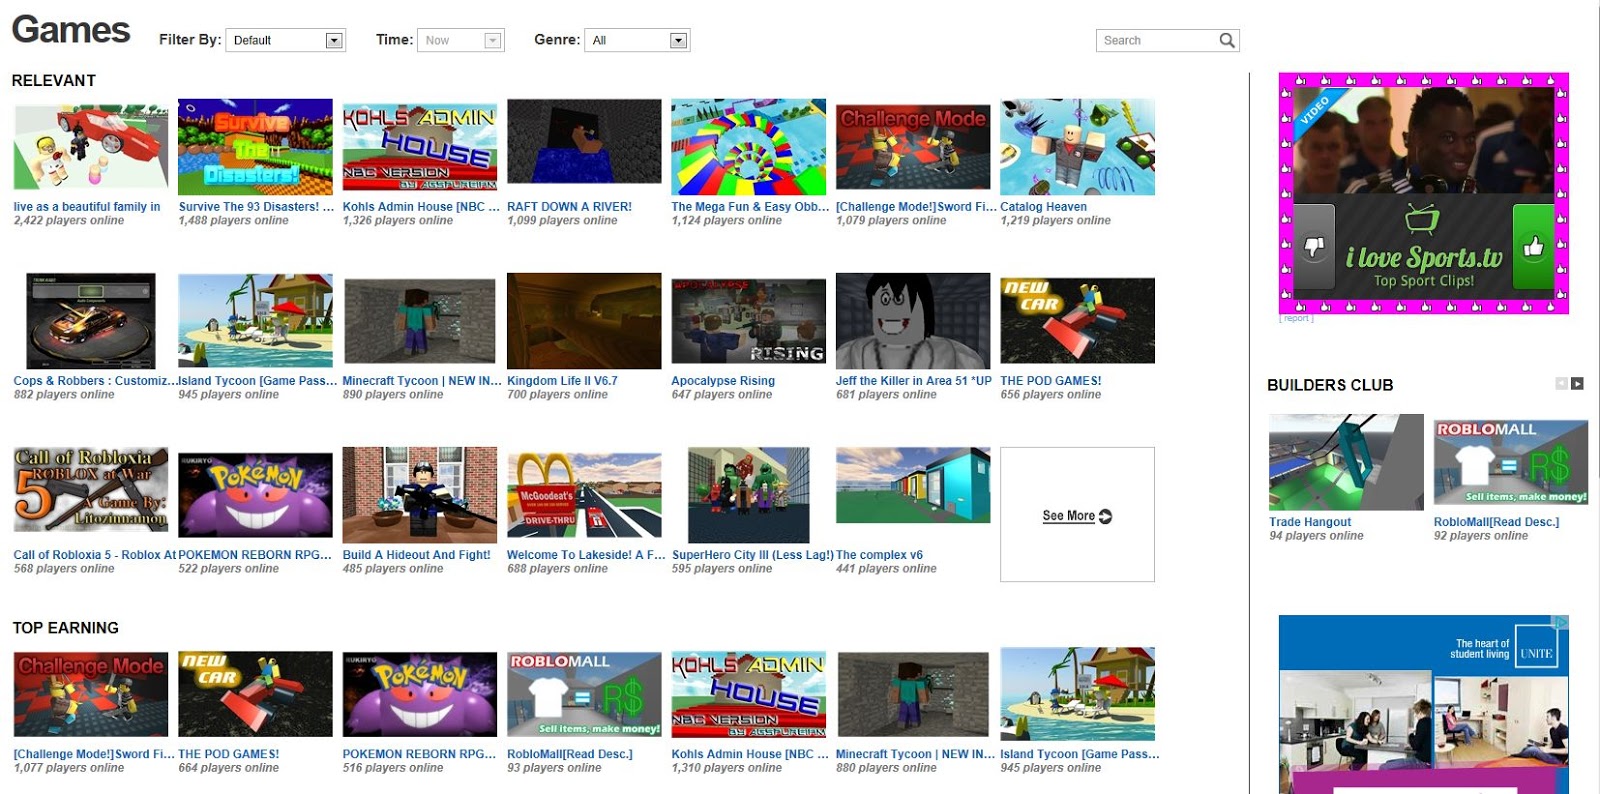 Unofficial Roblox Roblox Games Page Massive Layout Update New Look 2013 - how do you become a builders club member on roblox